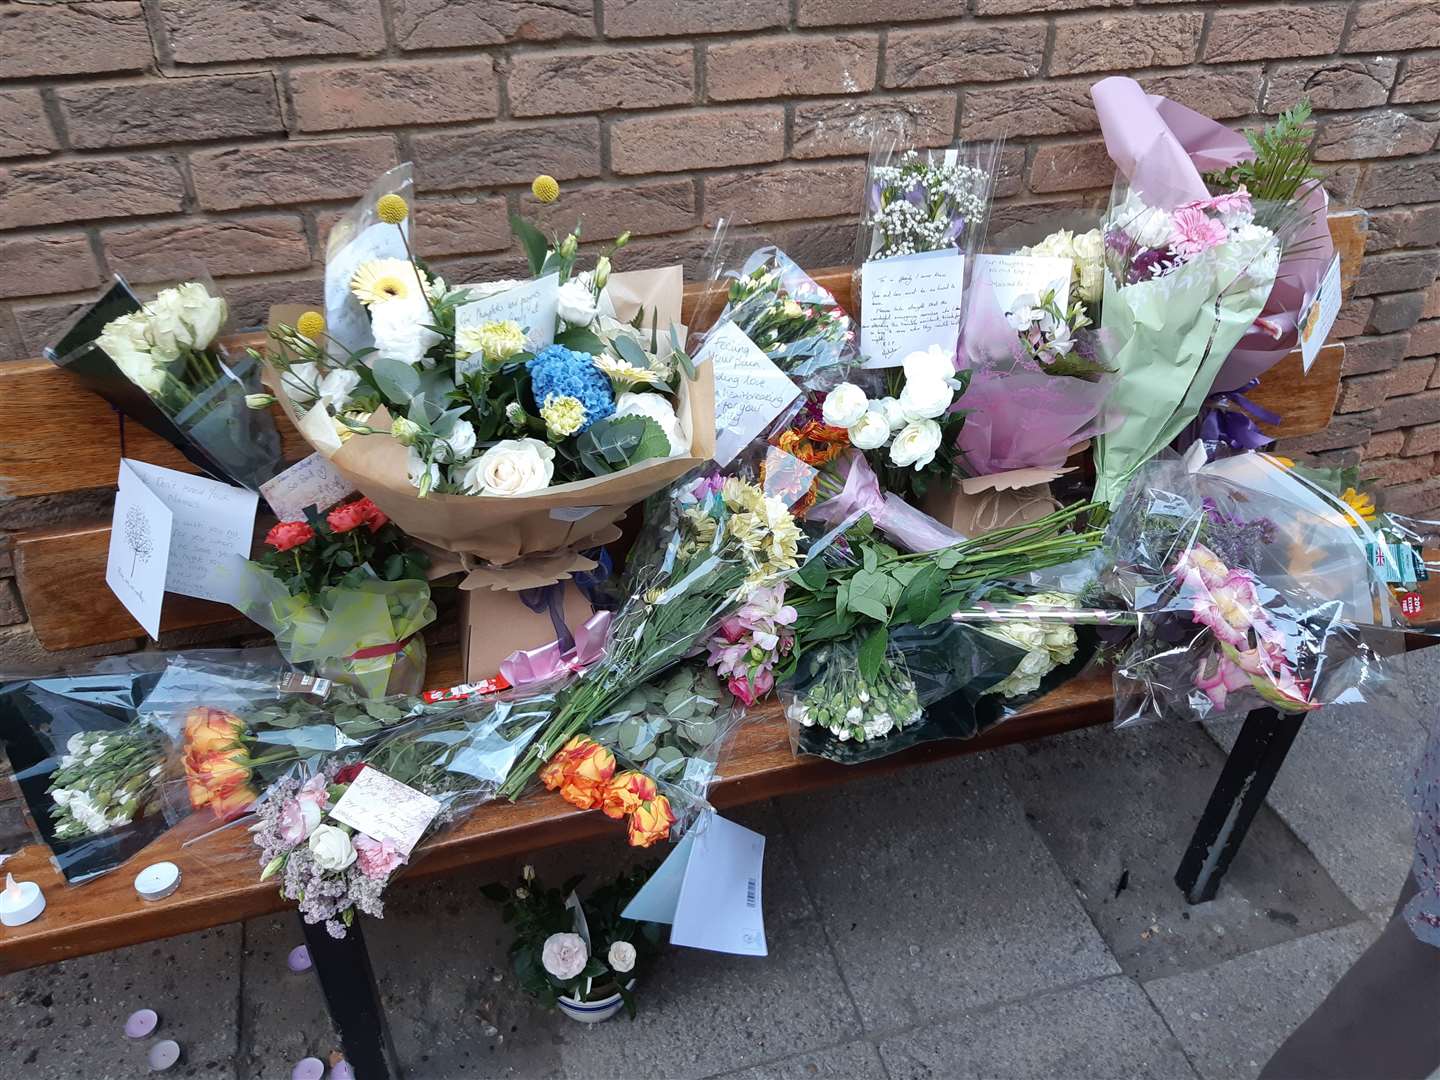 Flowers were left at the scene of the crash that killed Noga Sella and Yoram Hirshfeld in Ramsgate earlier this year